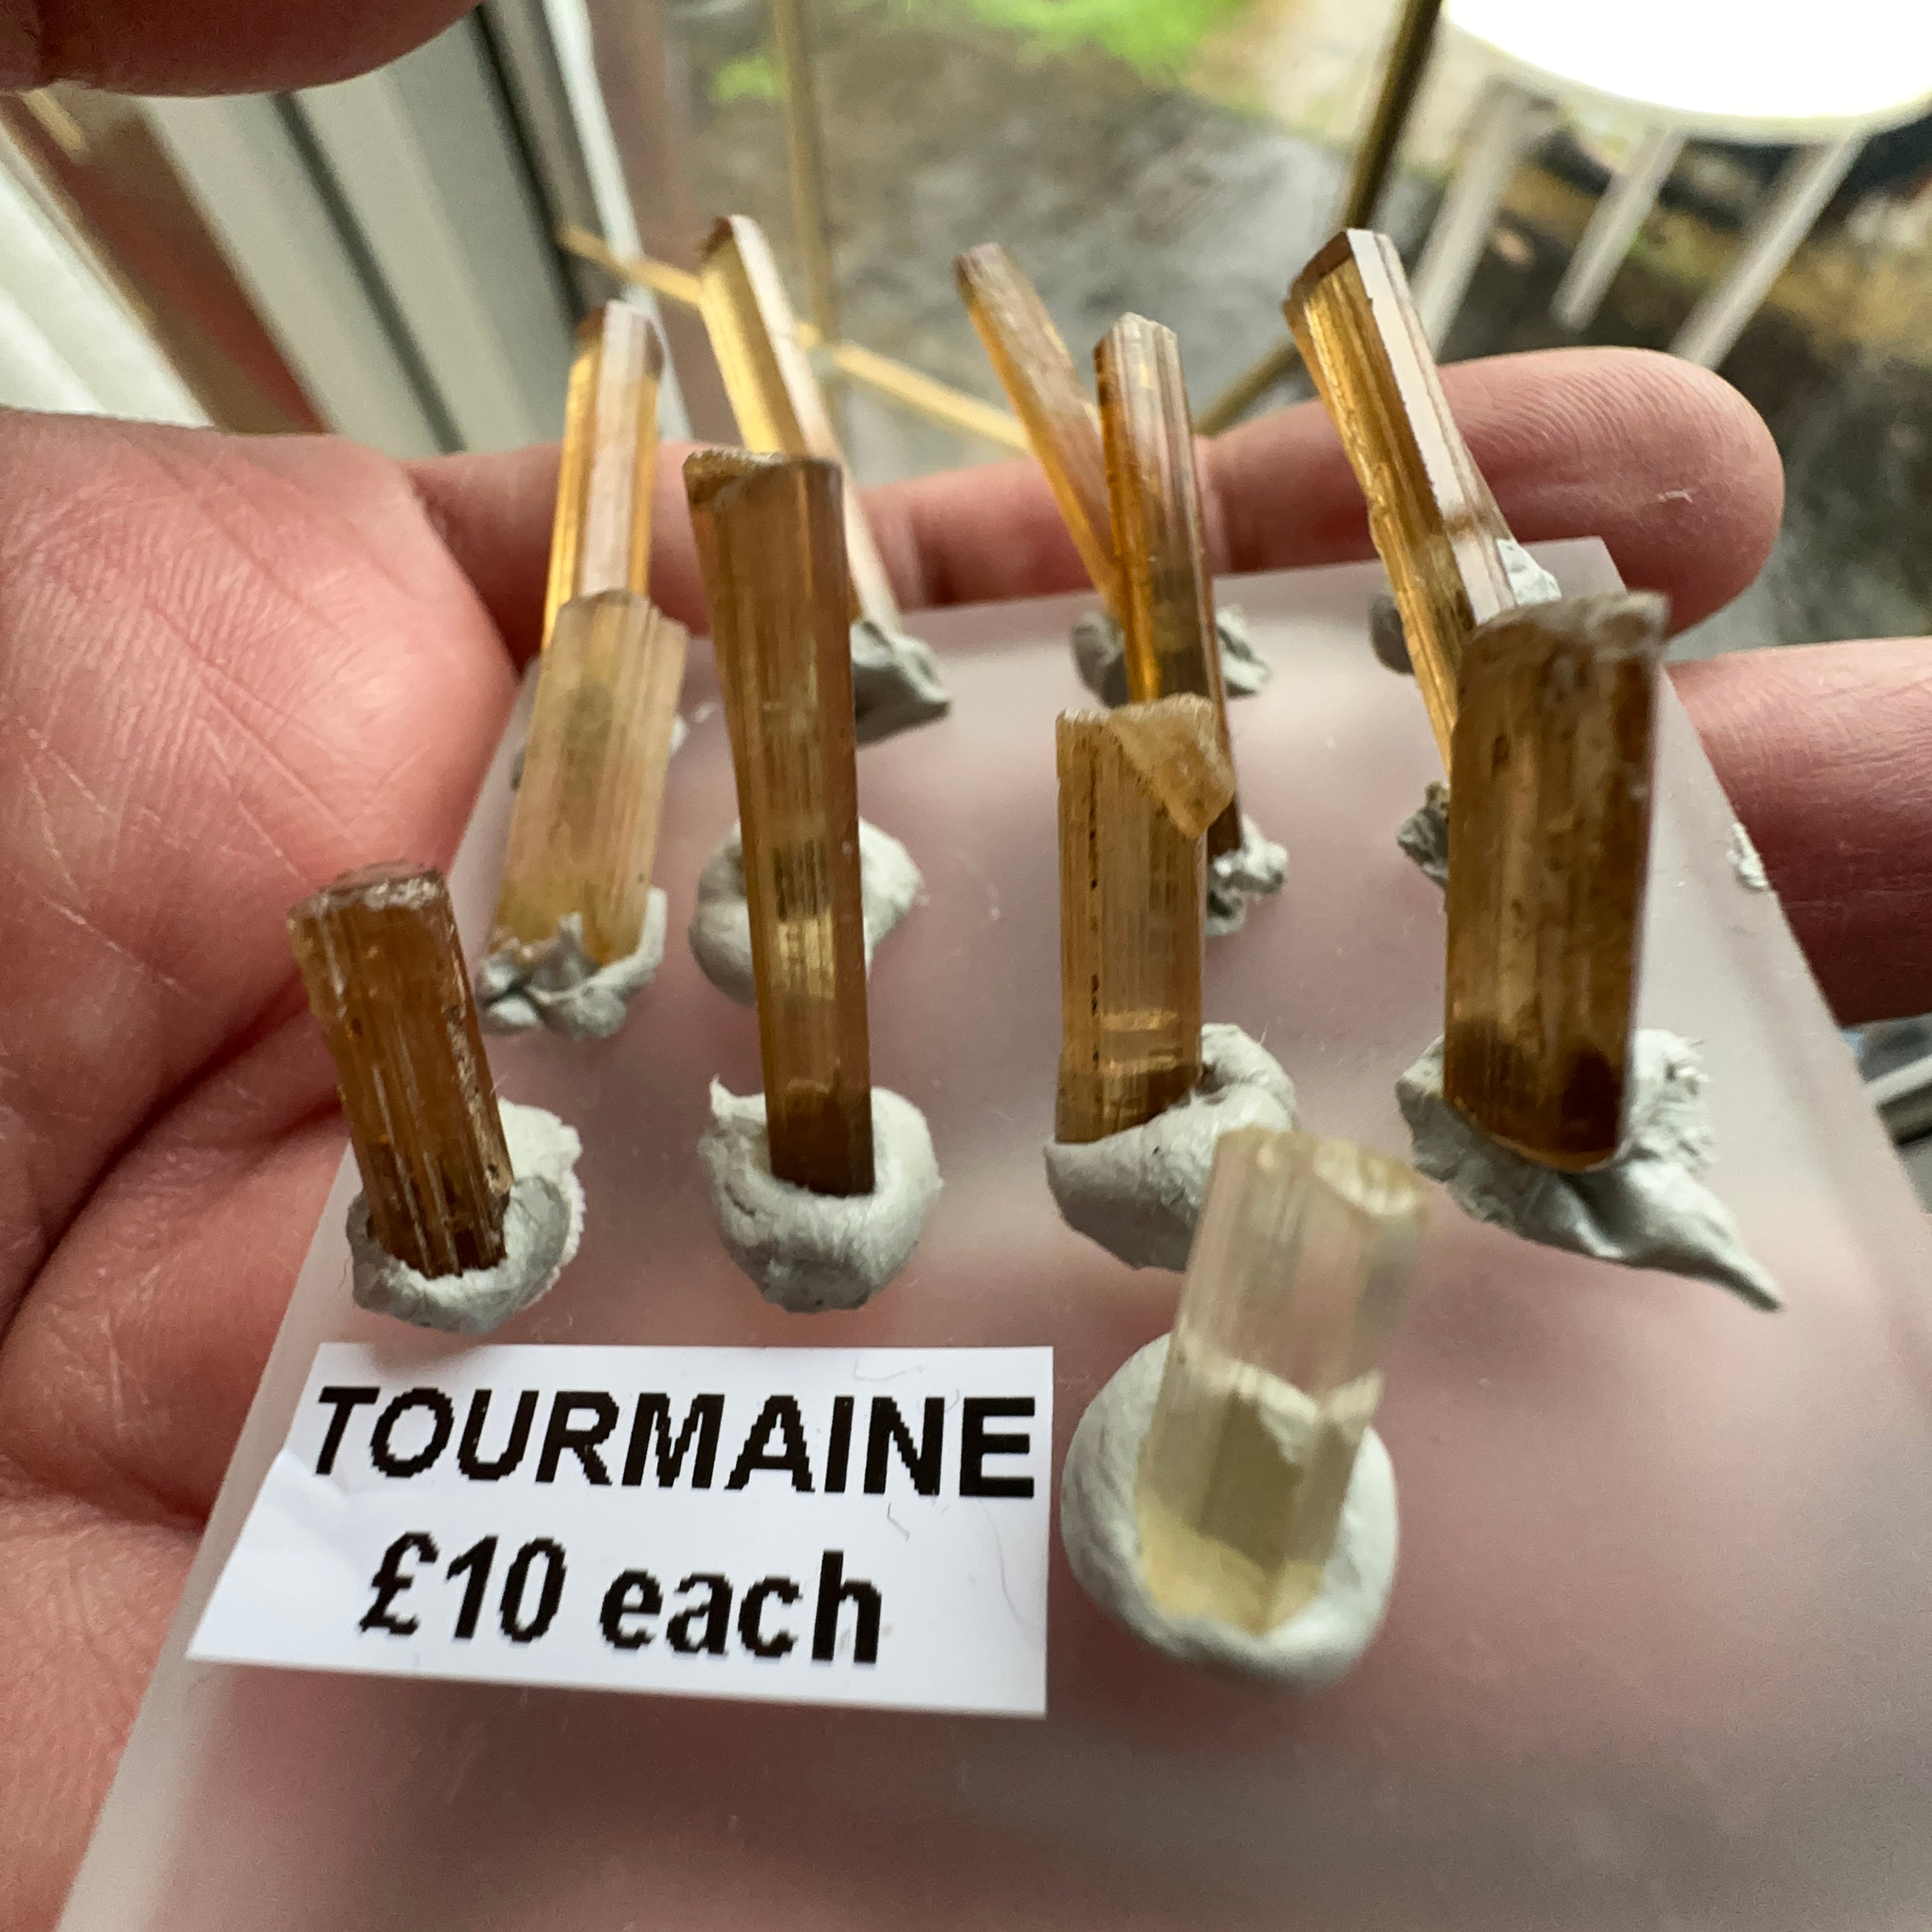 13pc Tourmaline Crystals Lot, Untreated Unheated, price for the lot